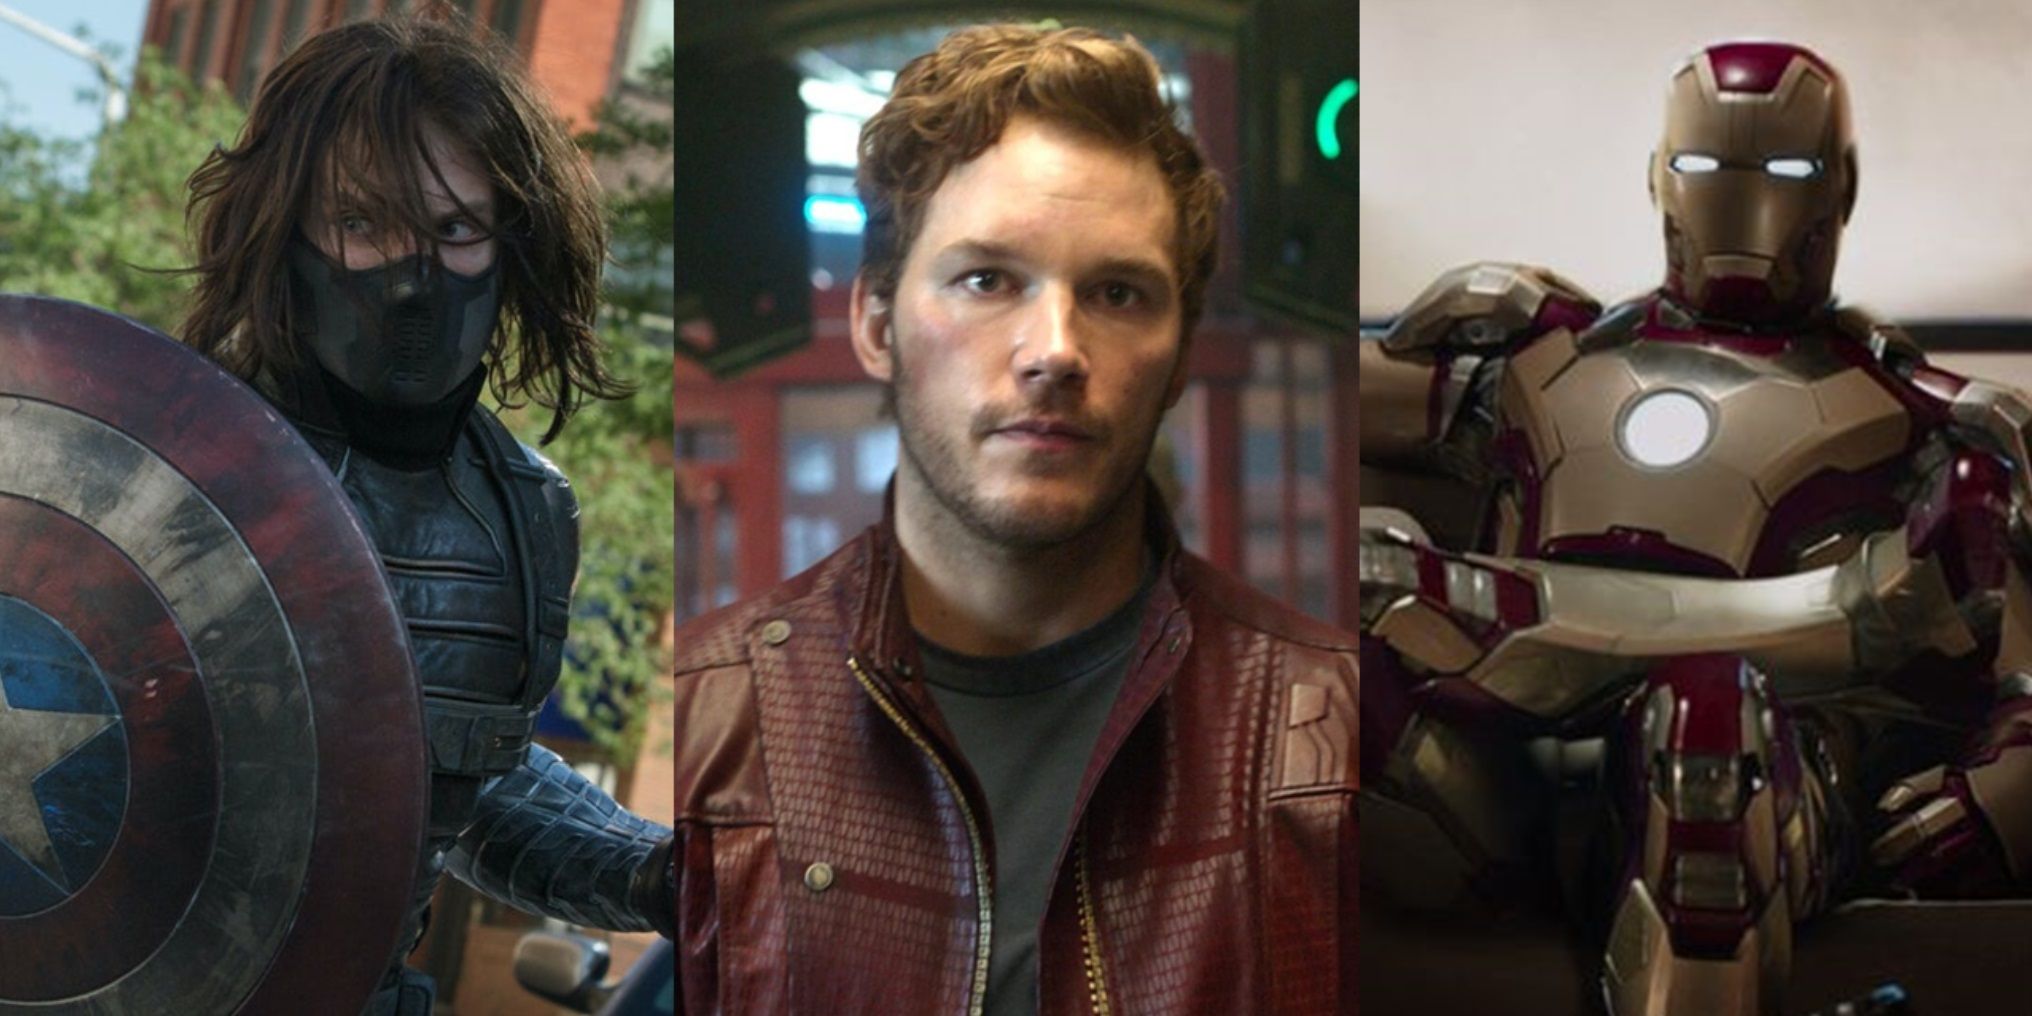 Split image of Bucky in The Winter Soldier, Quill in Guardians of the Galaxy, and an Iron Man suit in Iron Man 3